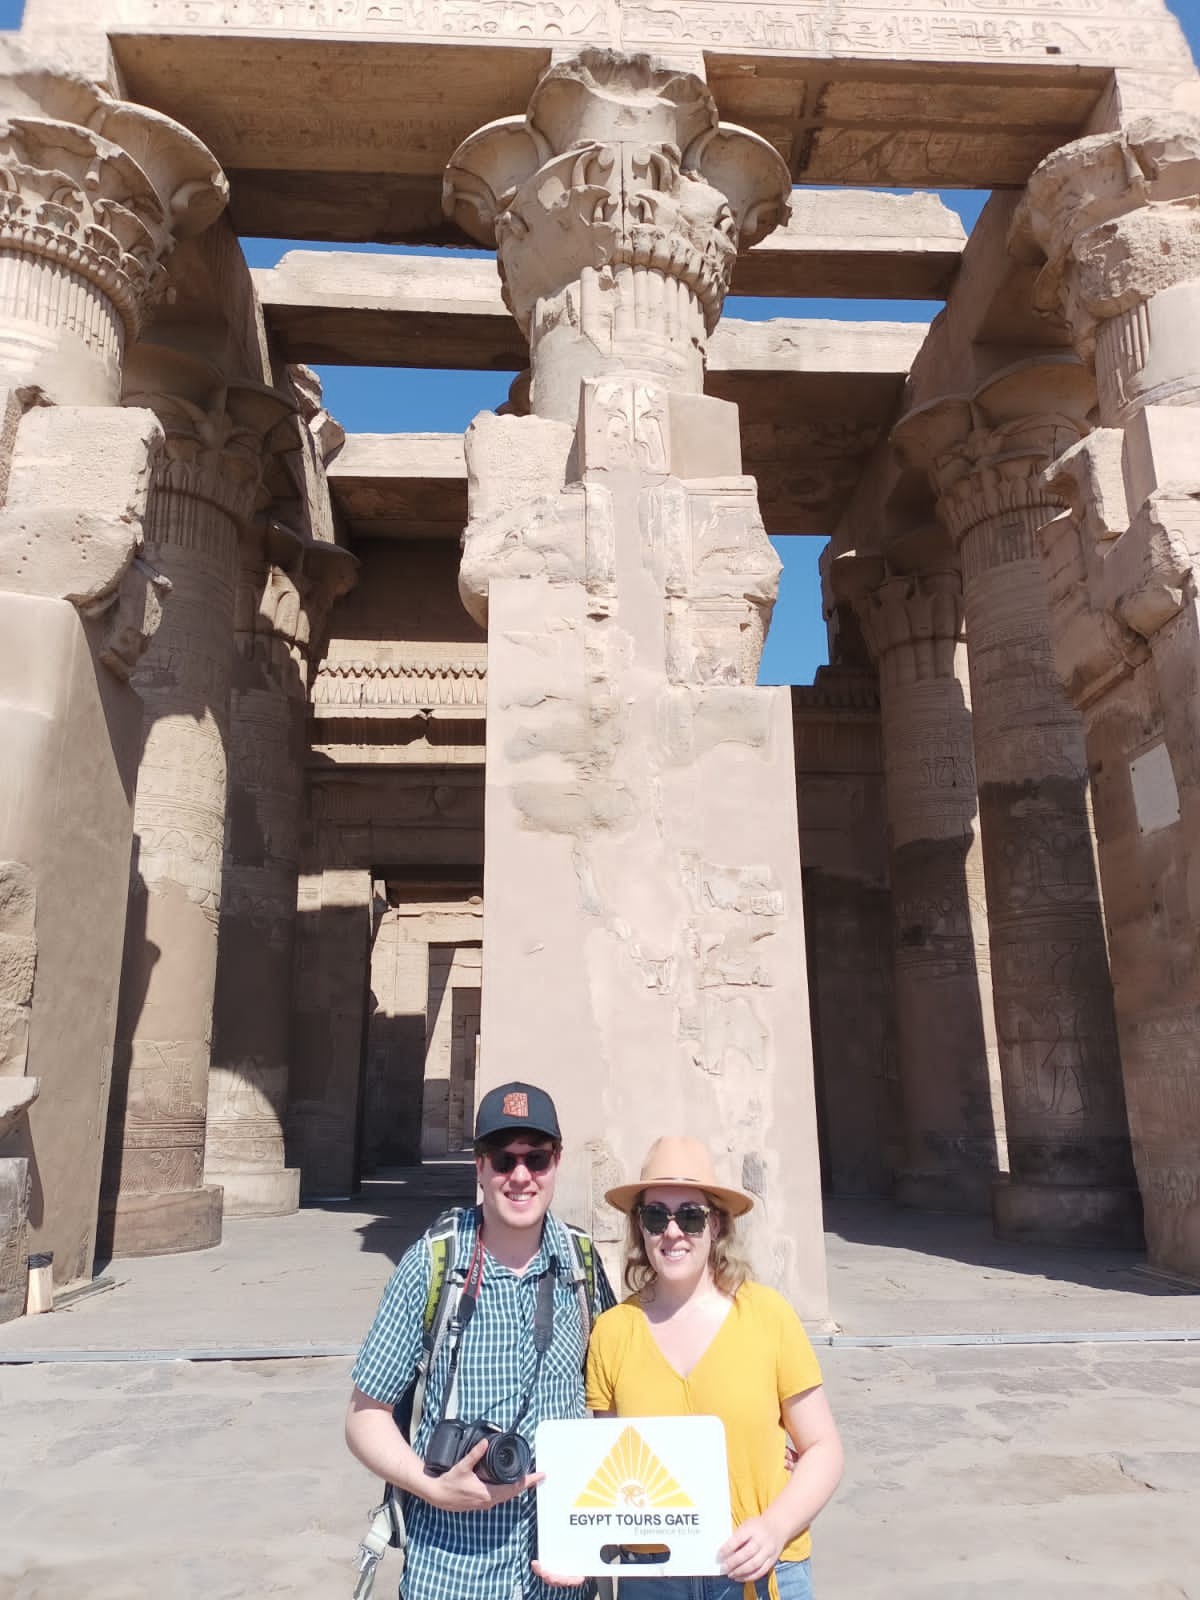 Luxor Excursions from Sharm el Sheikh by Flight